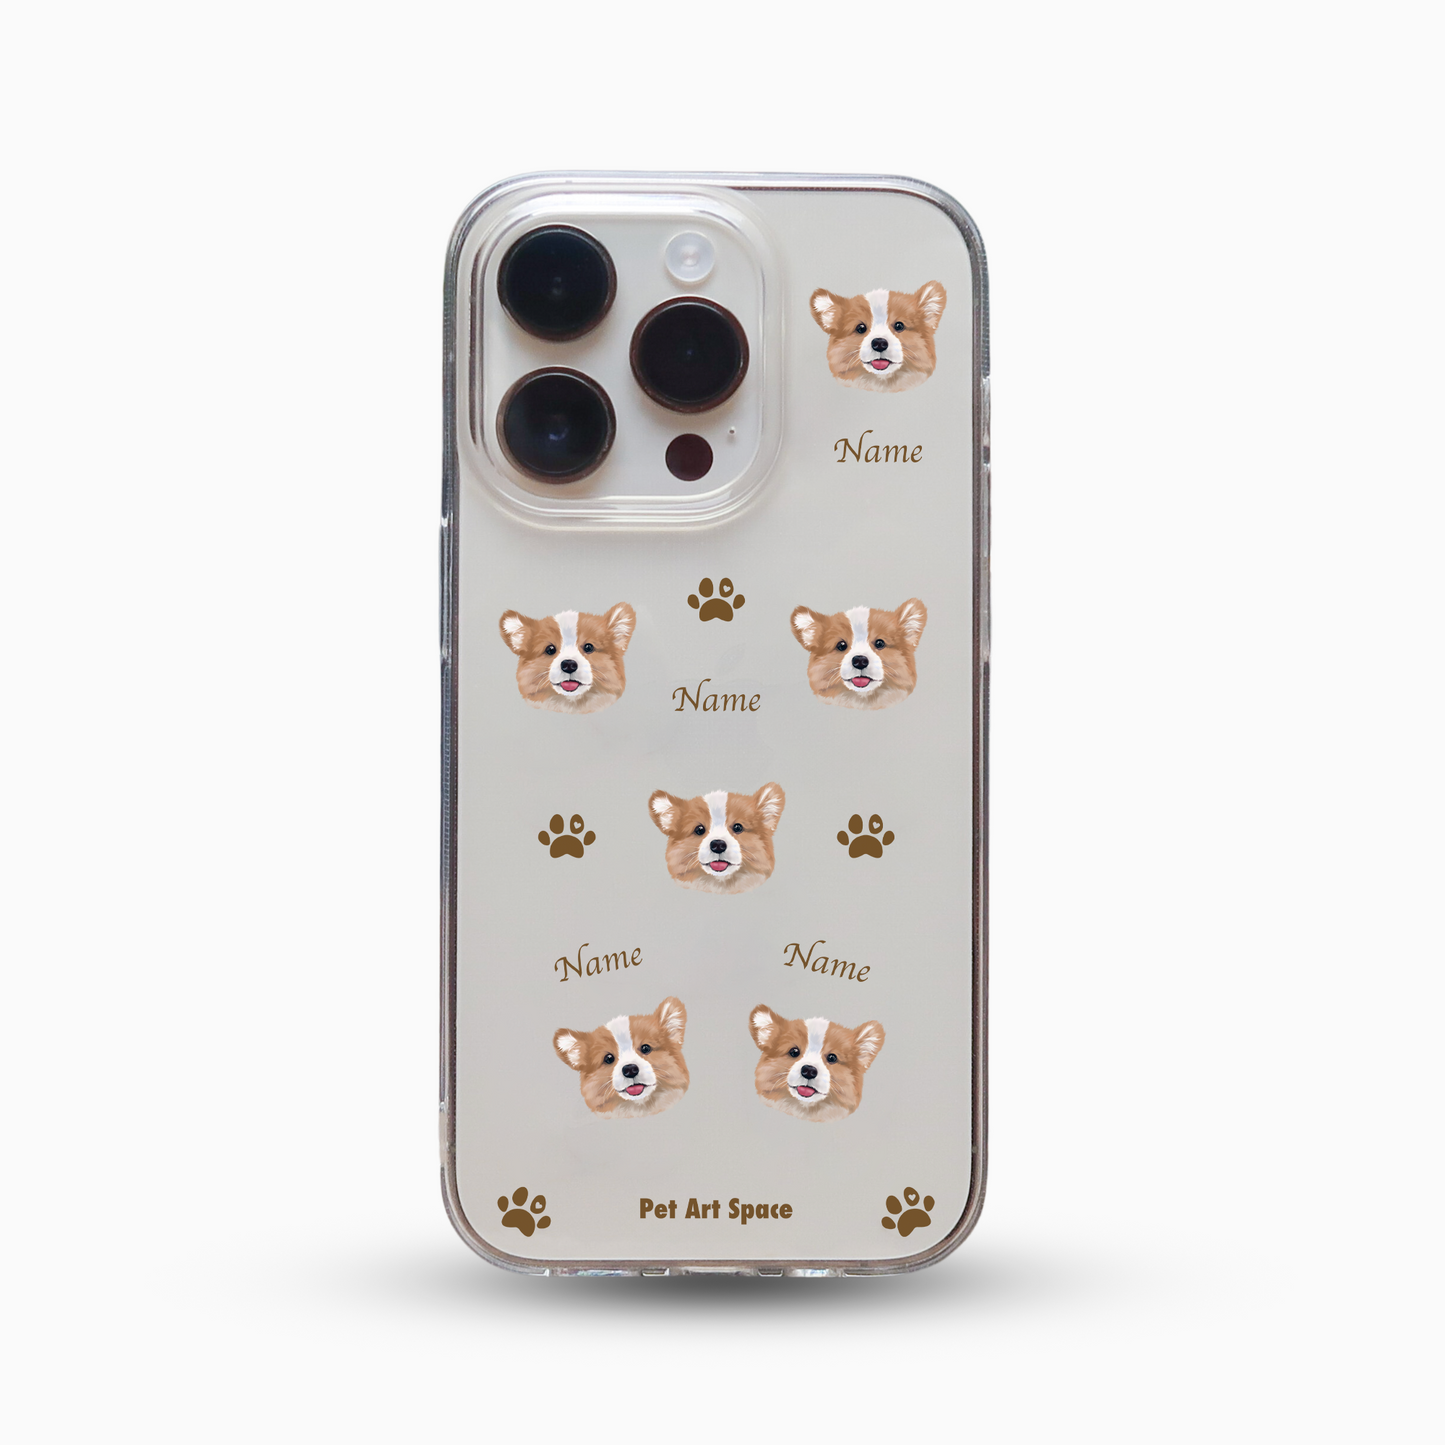 Paws for 1 Pet - Soft Clear Case with Camera Uncovered